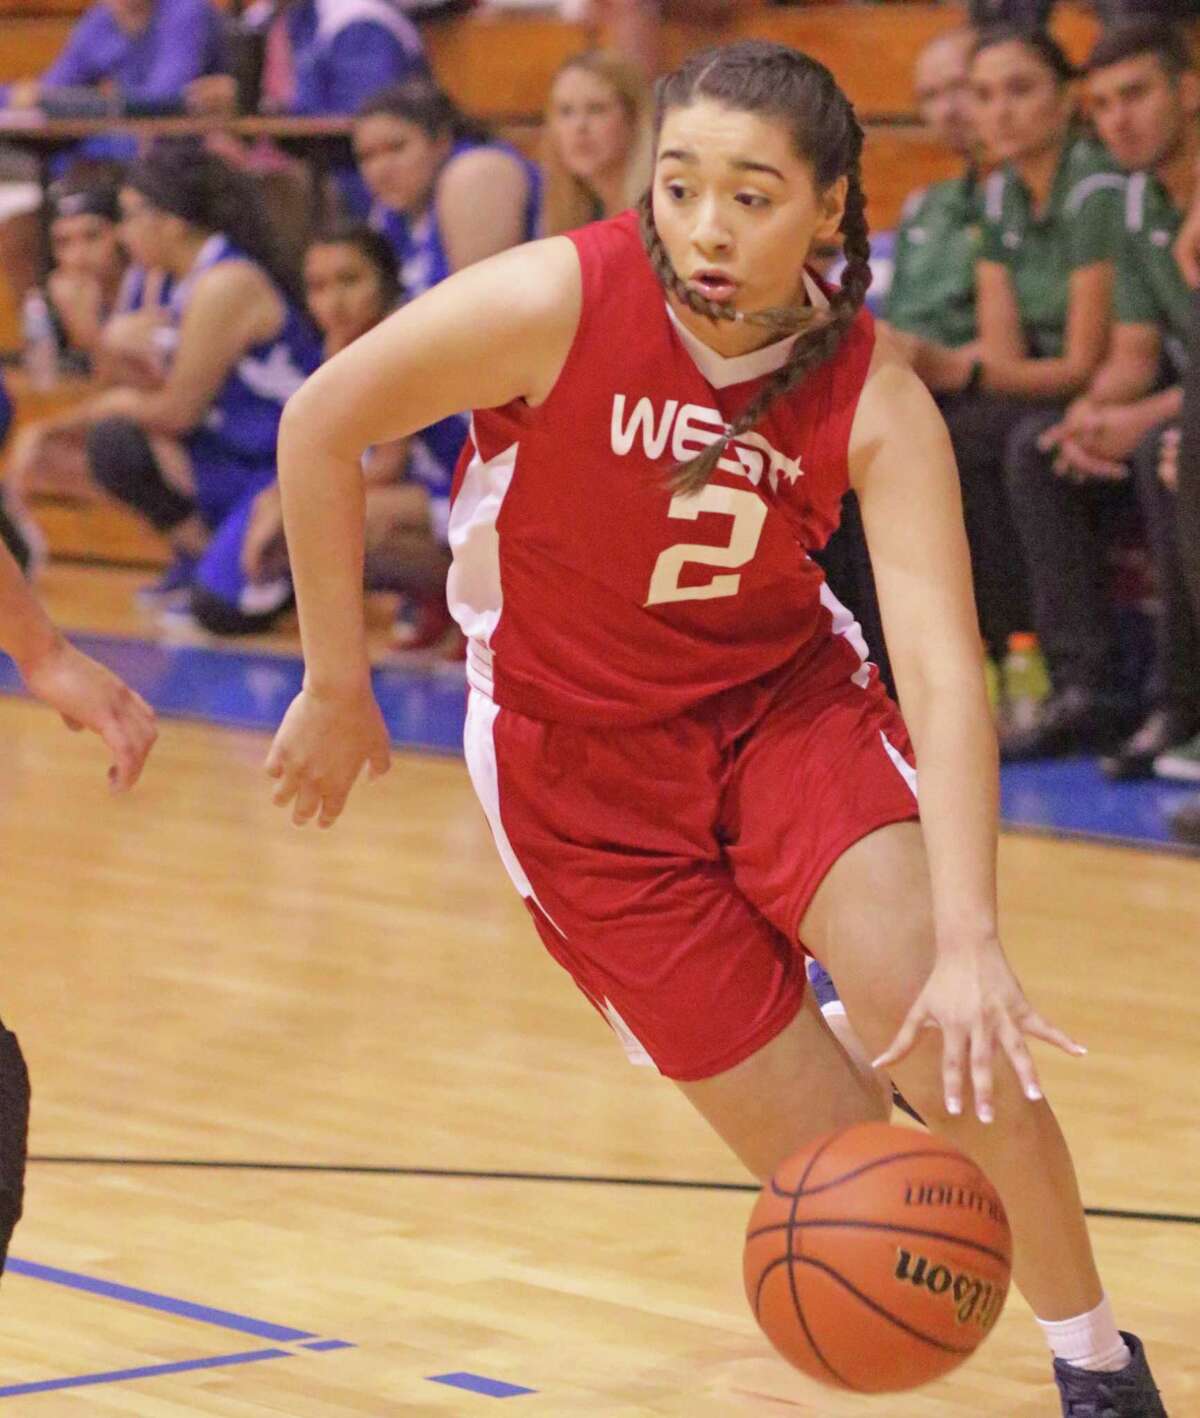 Alexander's Dannia González had a game-high 16 points but her West team lost 65-59 in the 16th annual Bosom Buddies All-Star girls’ basketball game at St. Augustine.